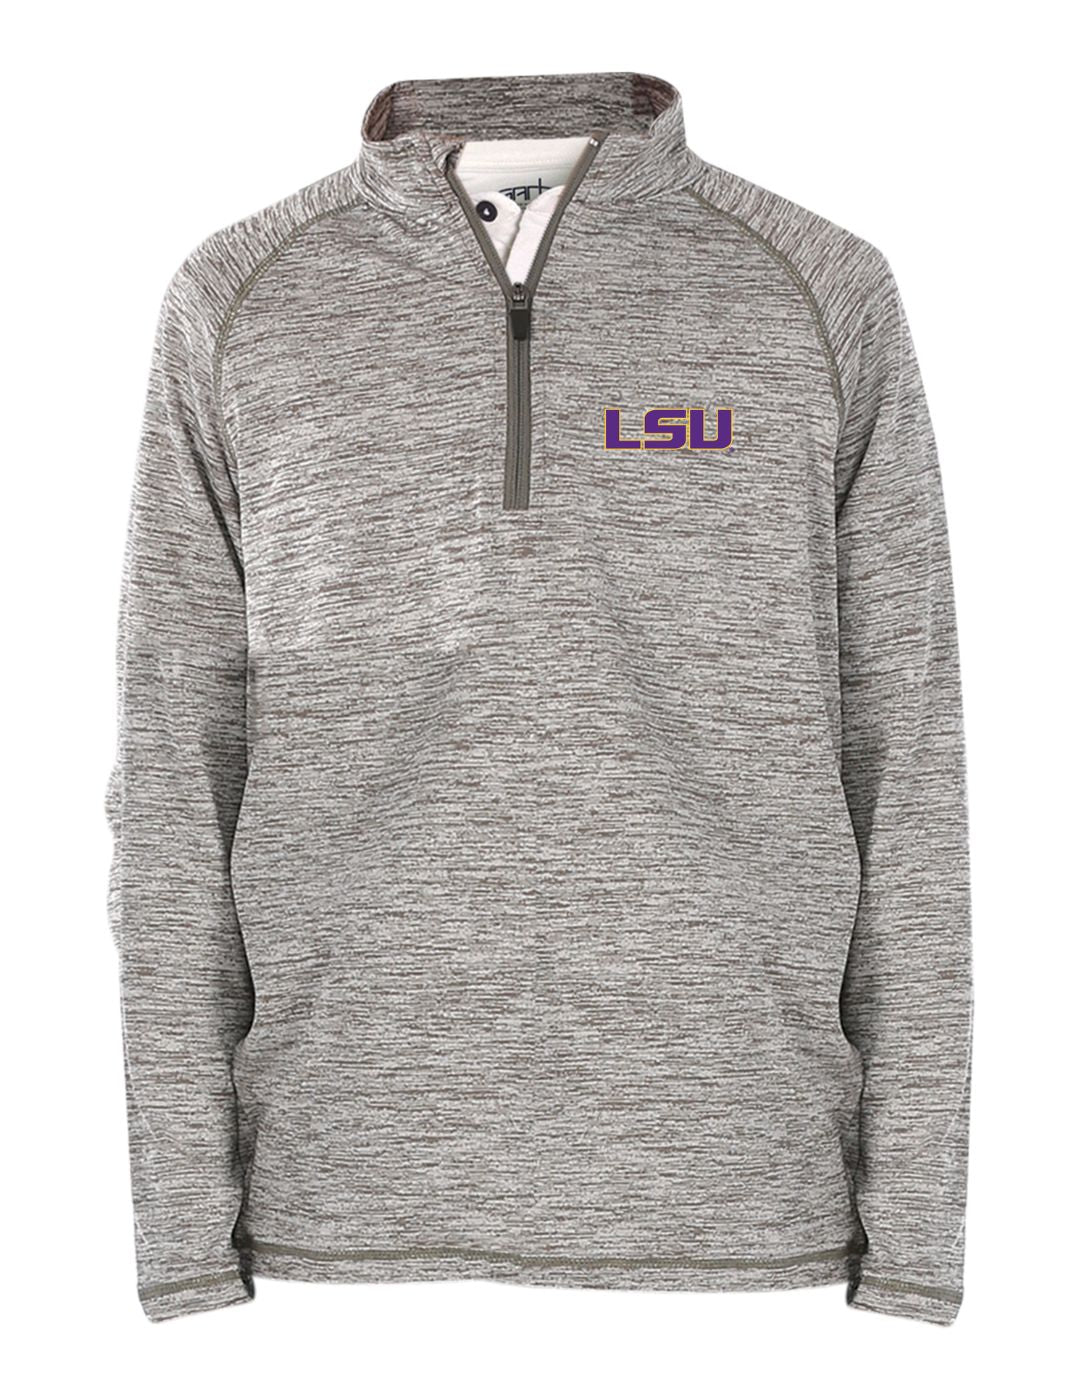 LSU Tigers Youth Boys' 1/4-Zip Pullover